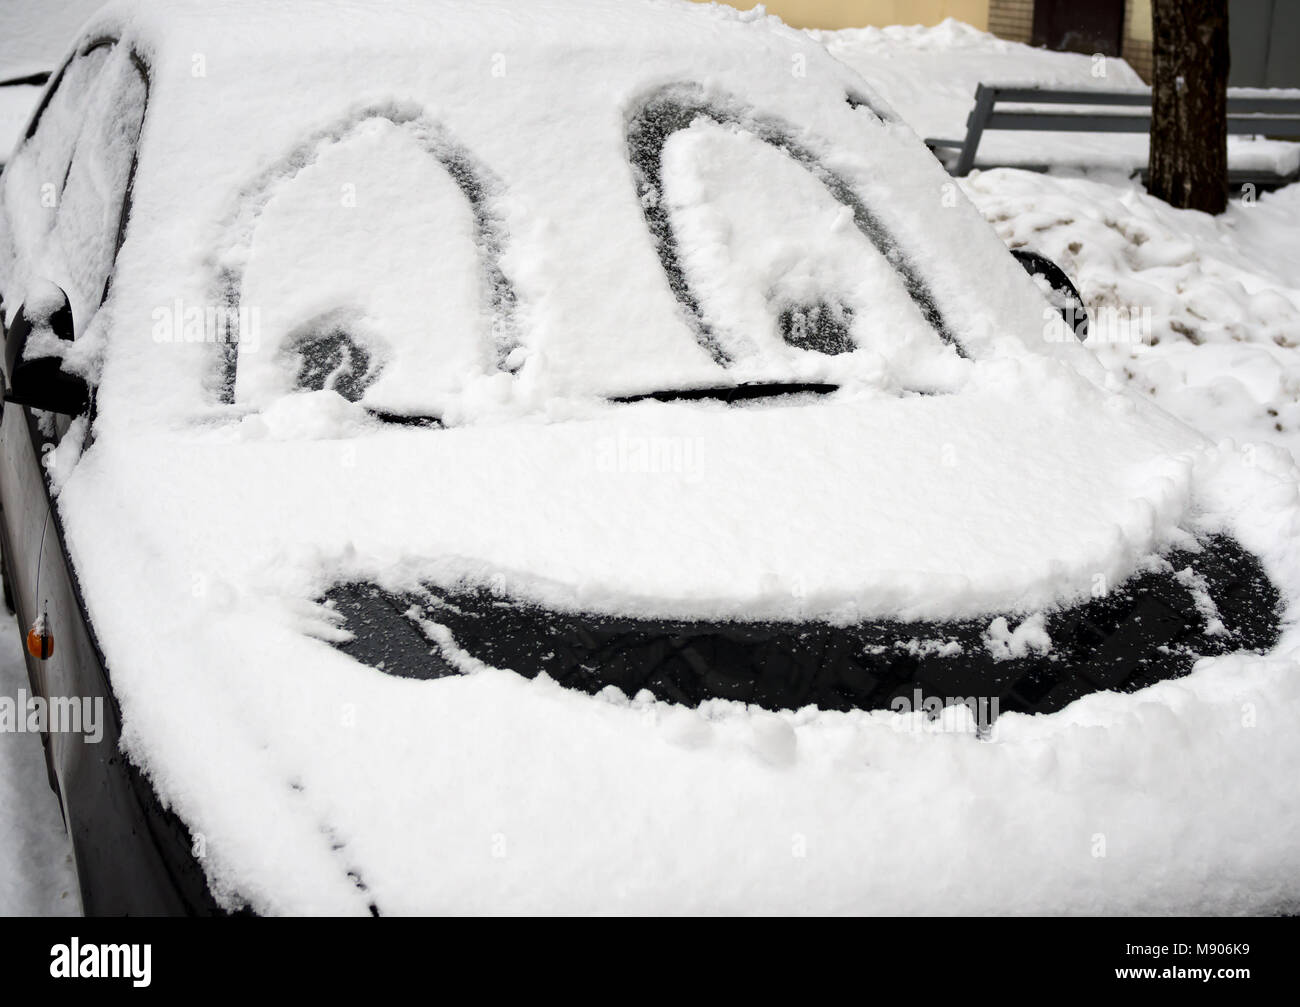 A drawn smiley face in winter on the snow-covered white color car  windshield. A graphic winter season creative scene. The positive expression  as funny Stock Photo - Alamy